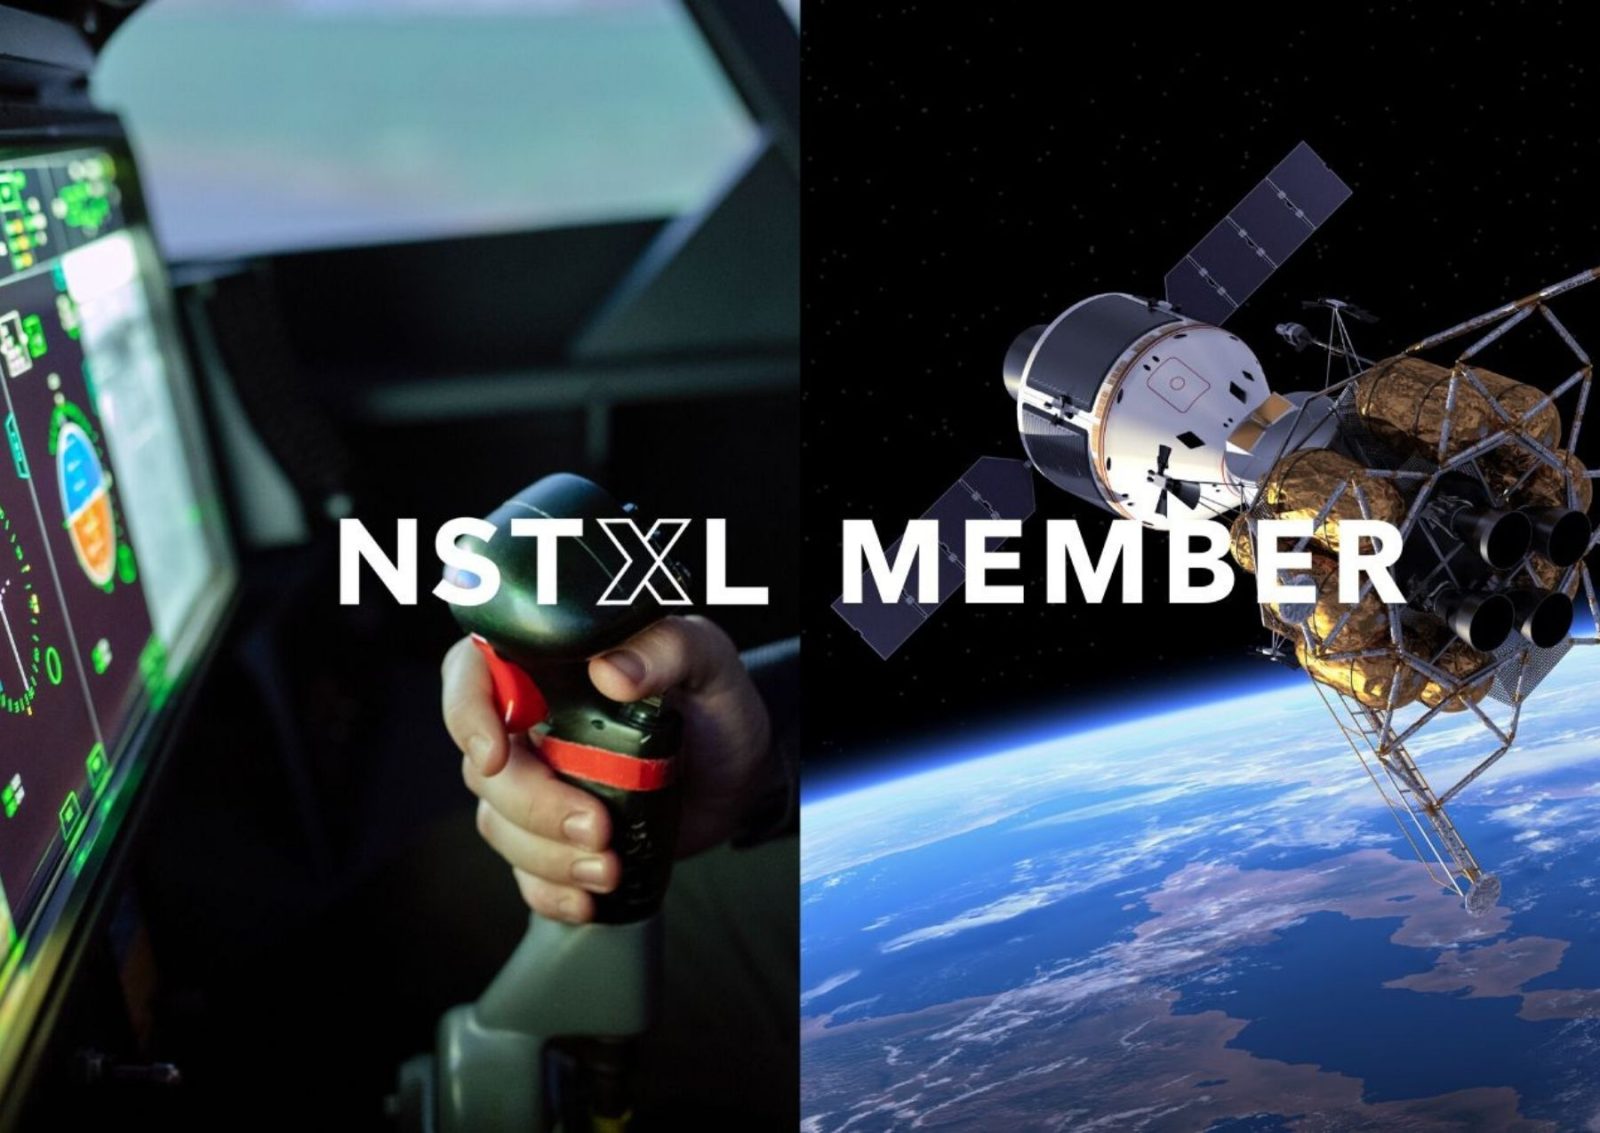 NSTXL (National Security Technology Accelerator) over space images.